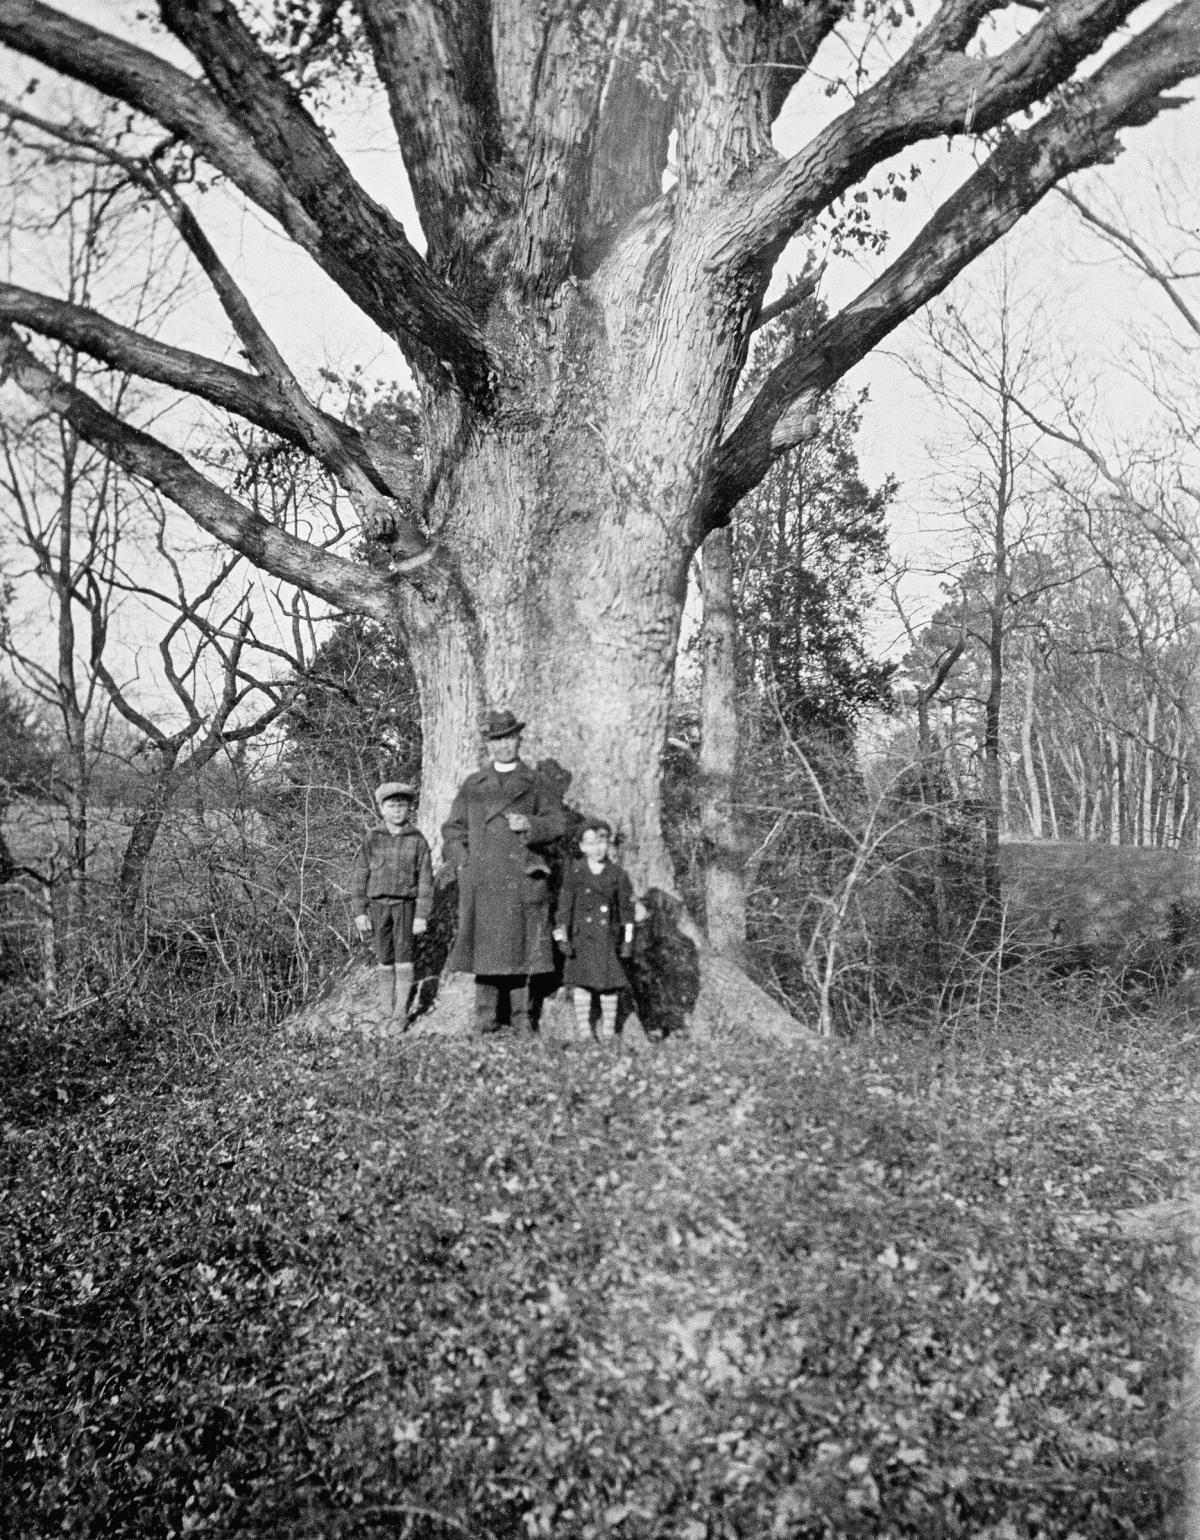 Goodwin with his sons Howard and William beneath the Great Oak at Bassett Hall, circa 1926.